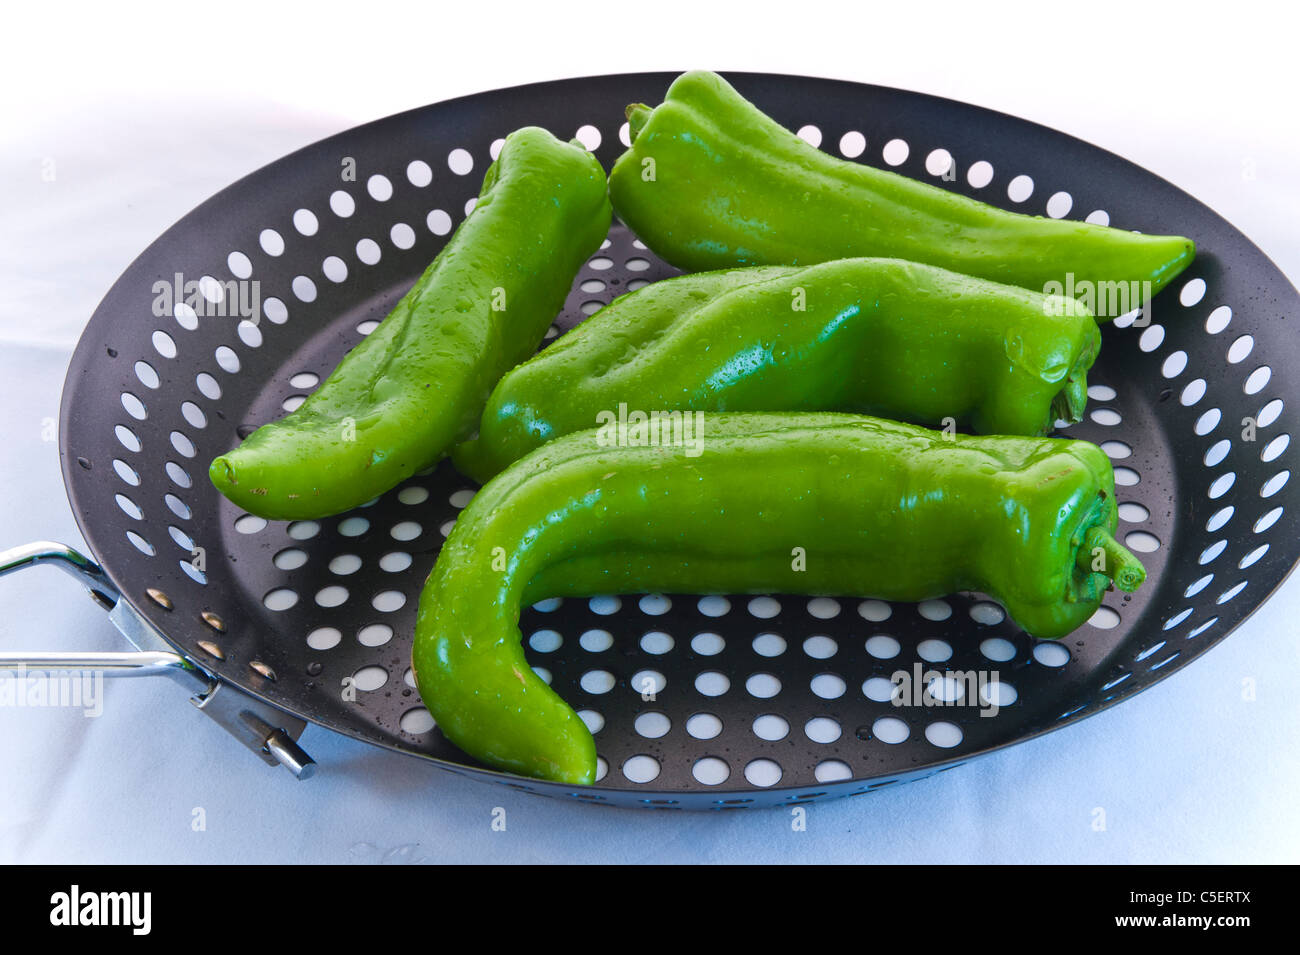 Green chili peppers are large, mild chilies are available in most local grocery stores. Stock Photo